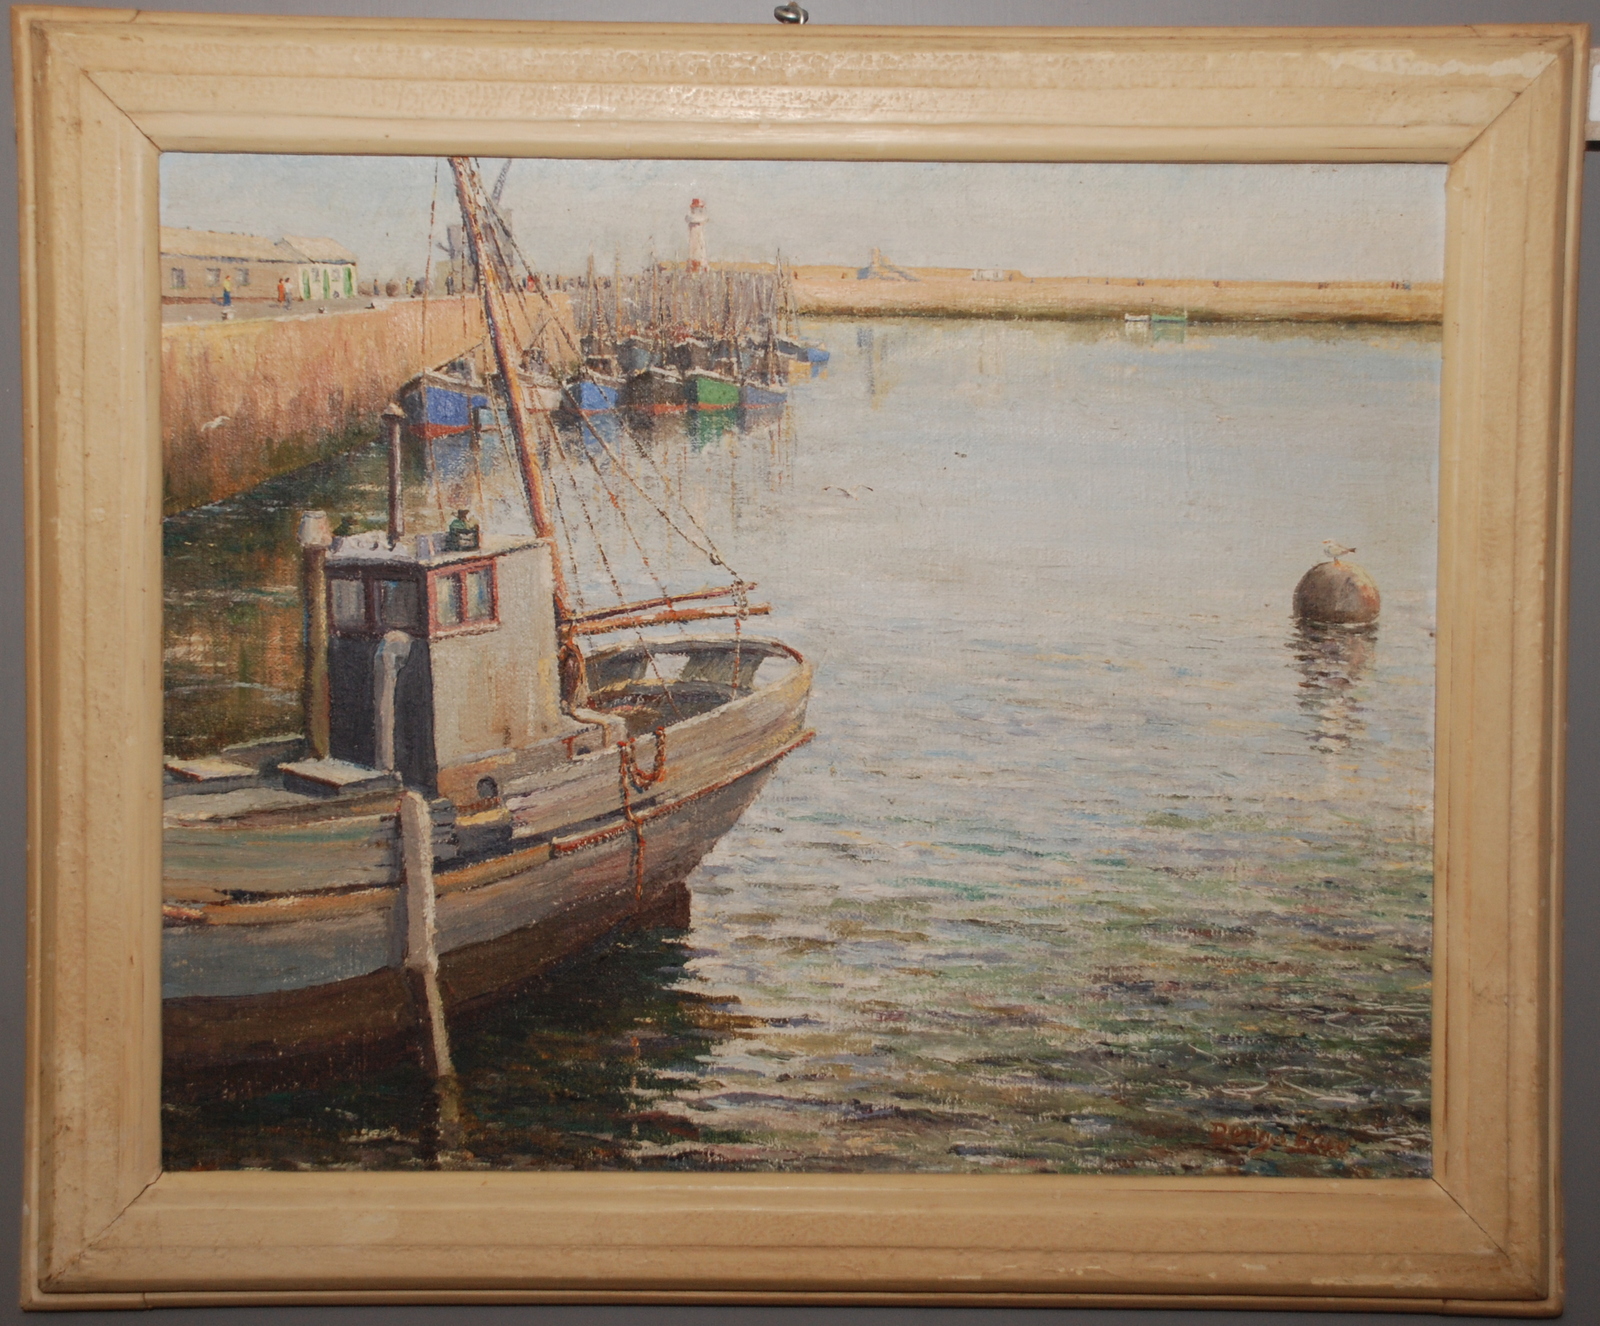 DENYS LAW Penzance Harbour Oil on canvas Signed 40 x 50cm - Image 2 of 2